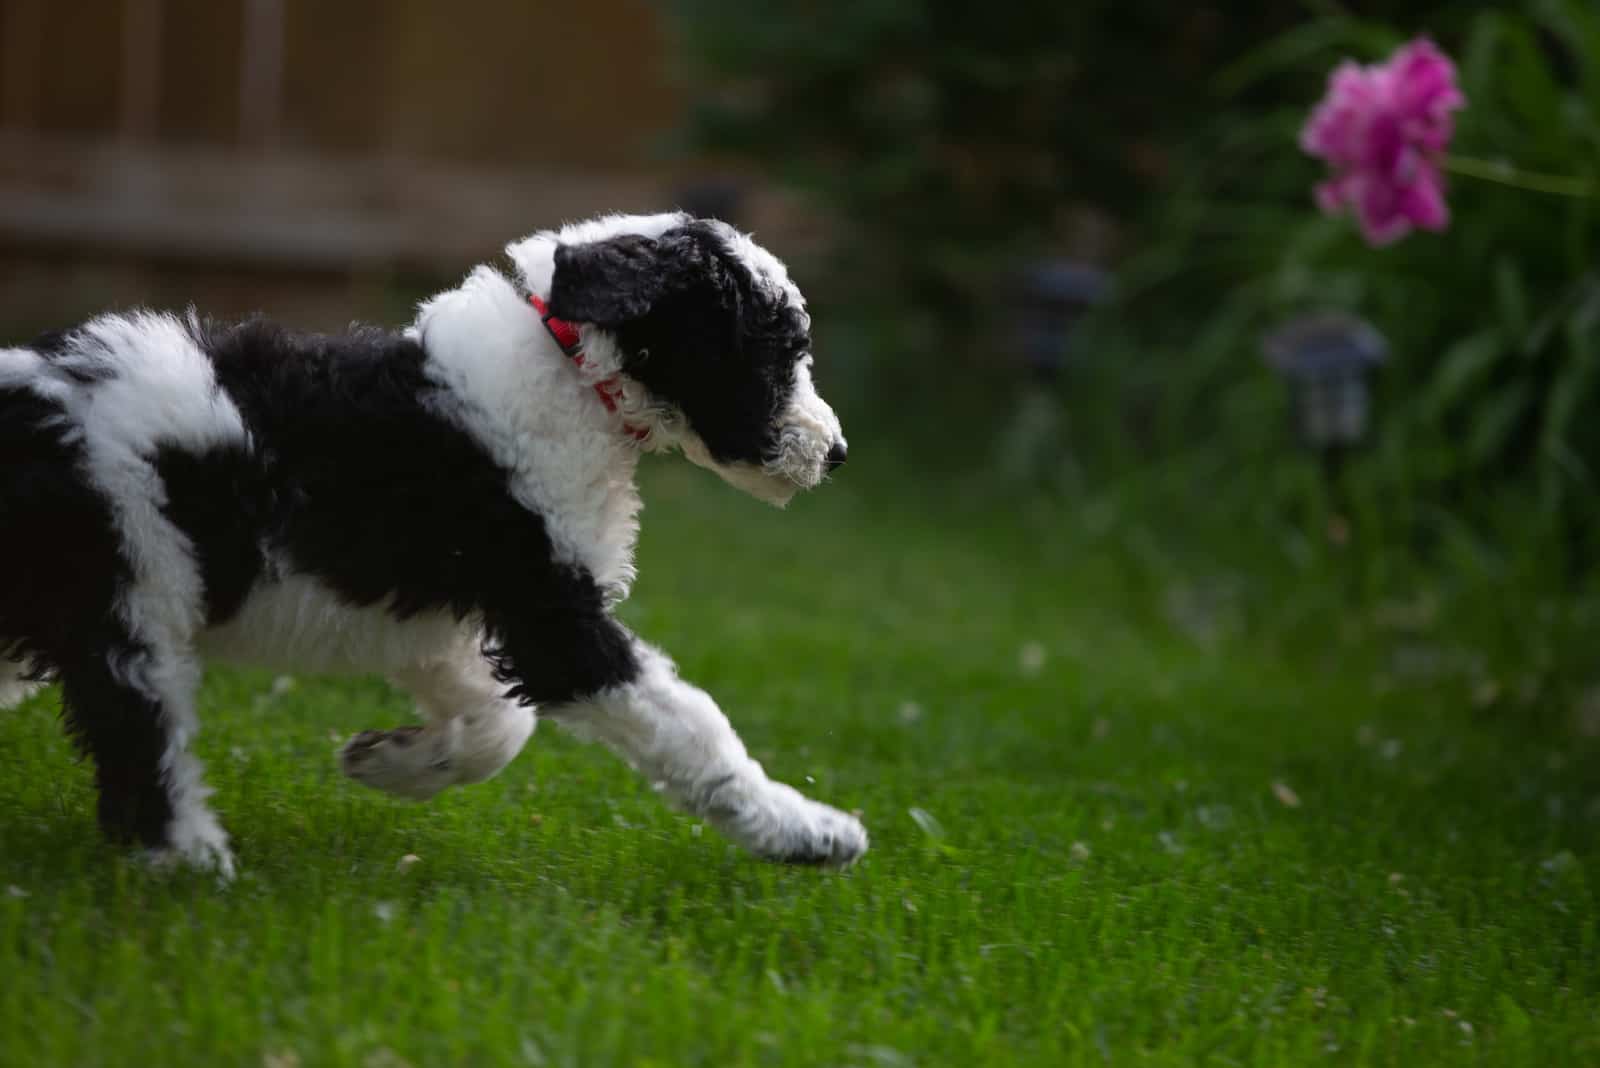 Sheepadoodle Puppy outside playing in the yard